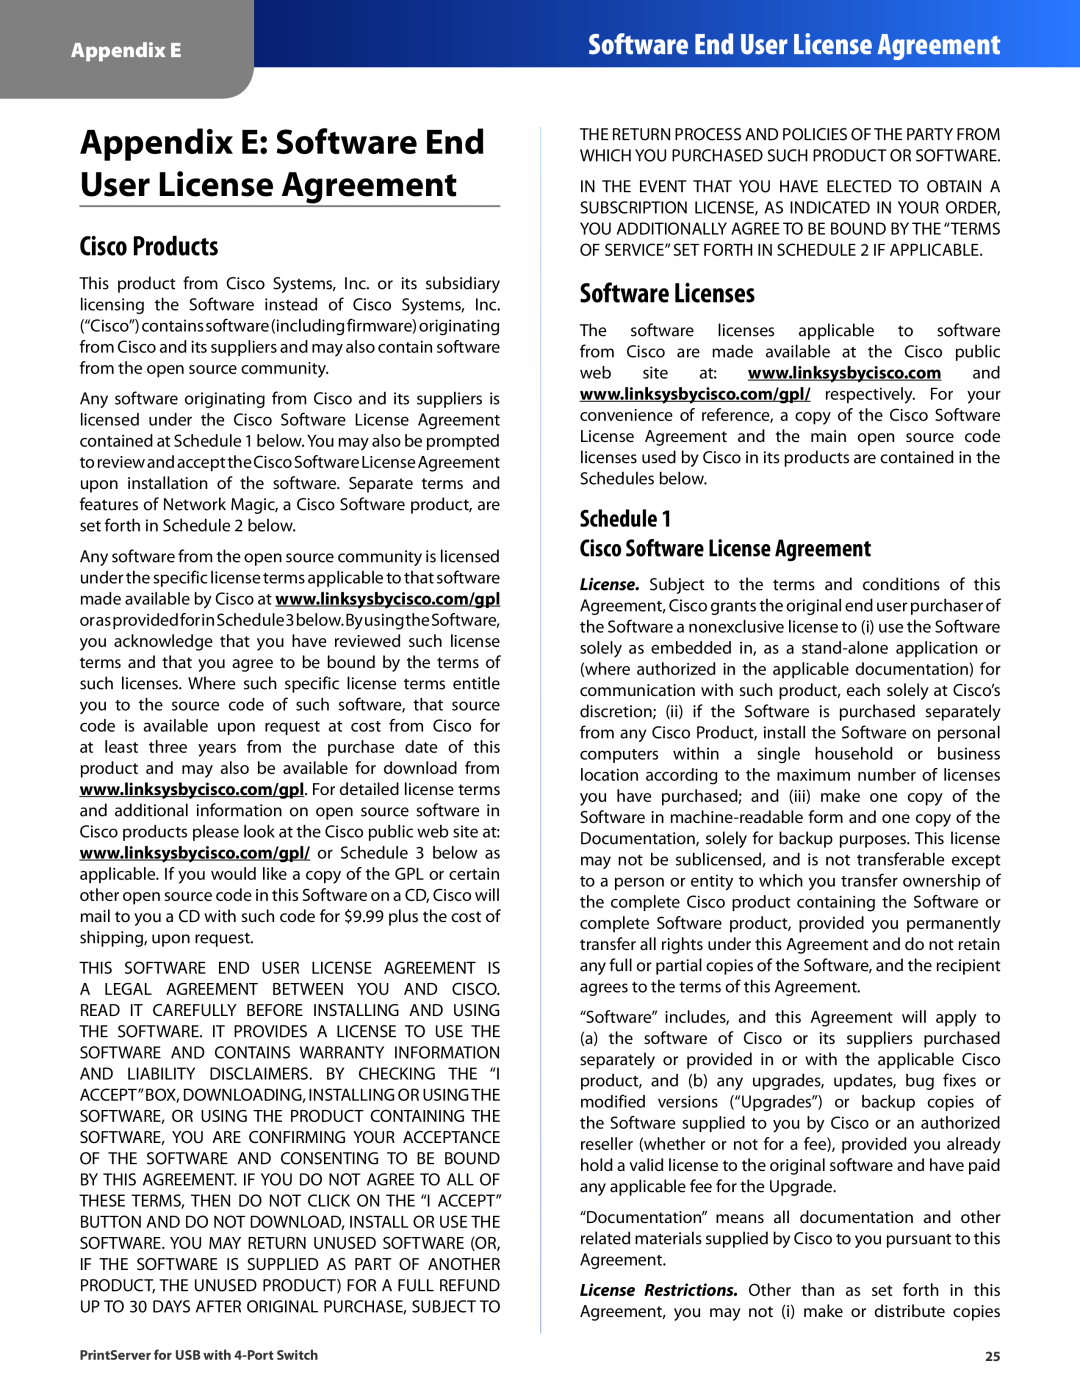 Cisco Systems PSUS4 manual Appendix E Software End User License Agreement, Cisco Products, Software Licenses 